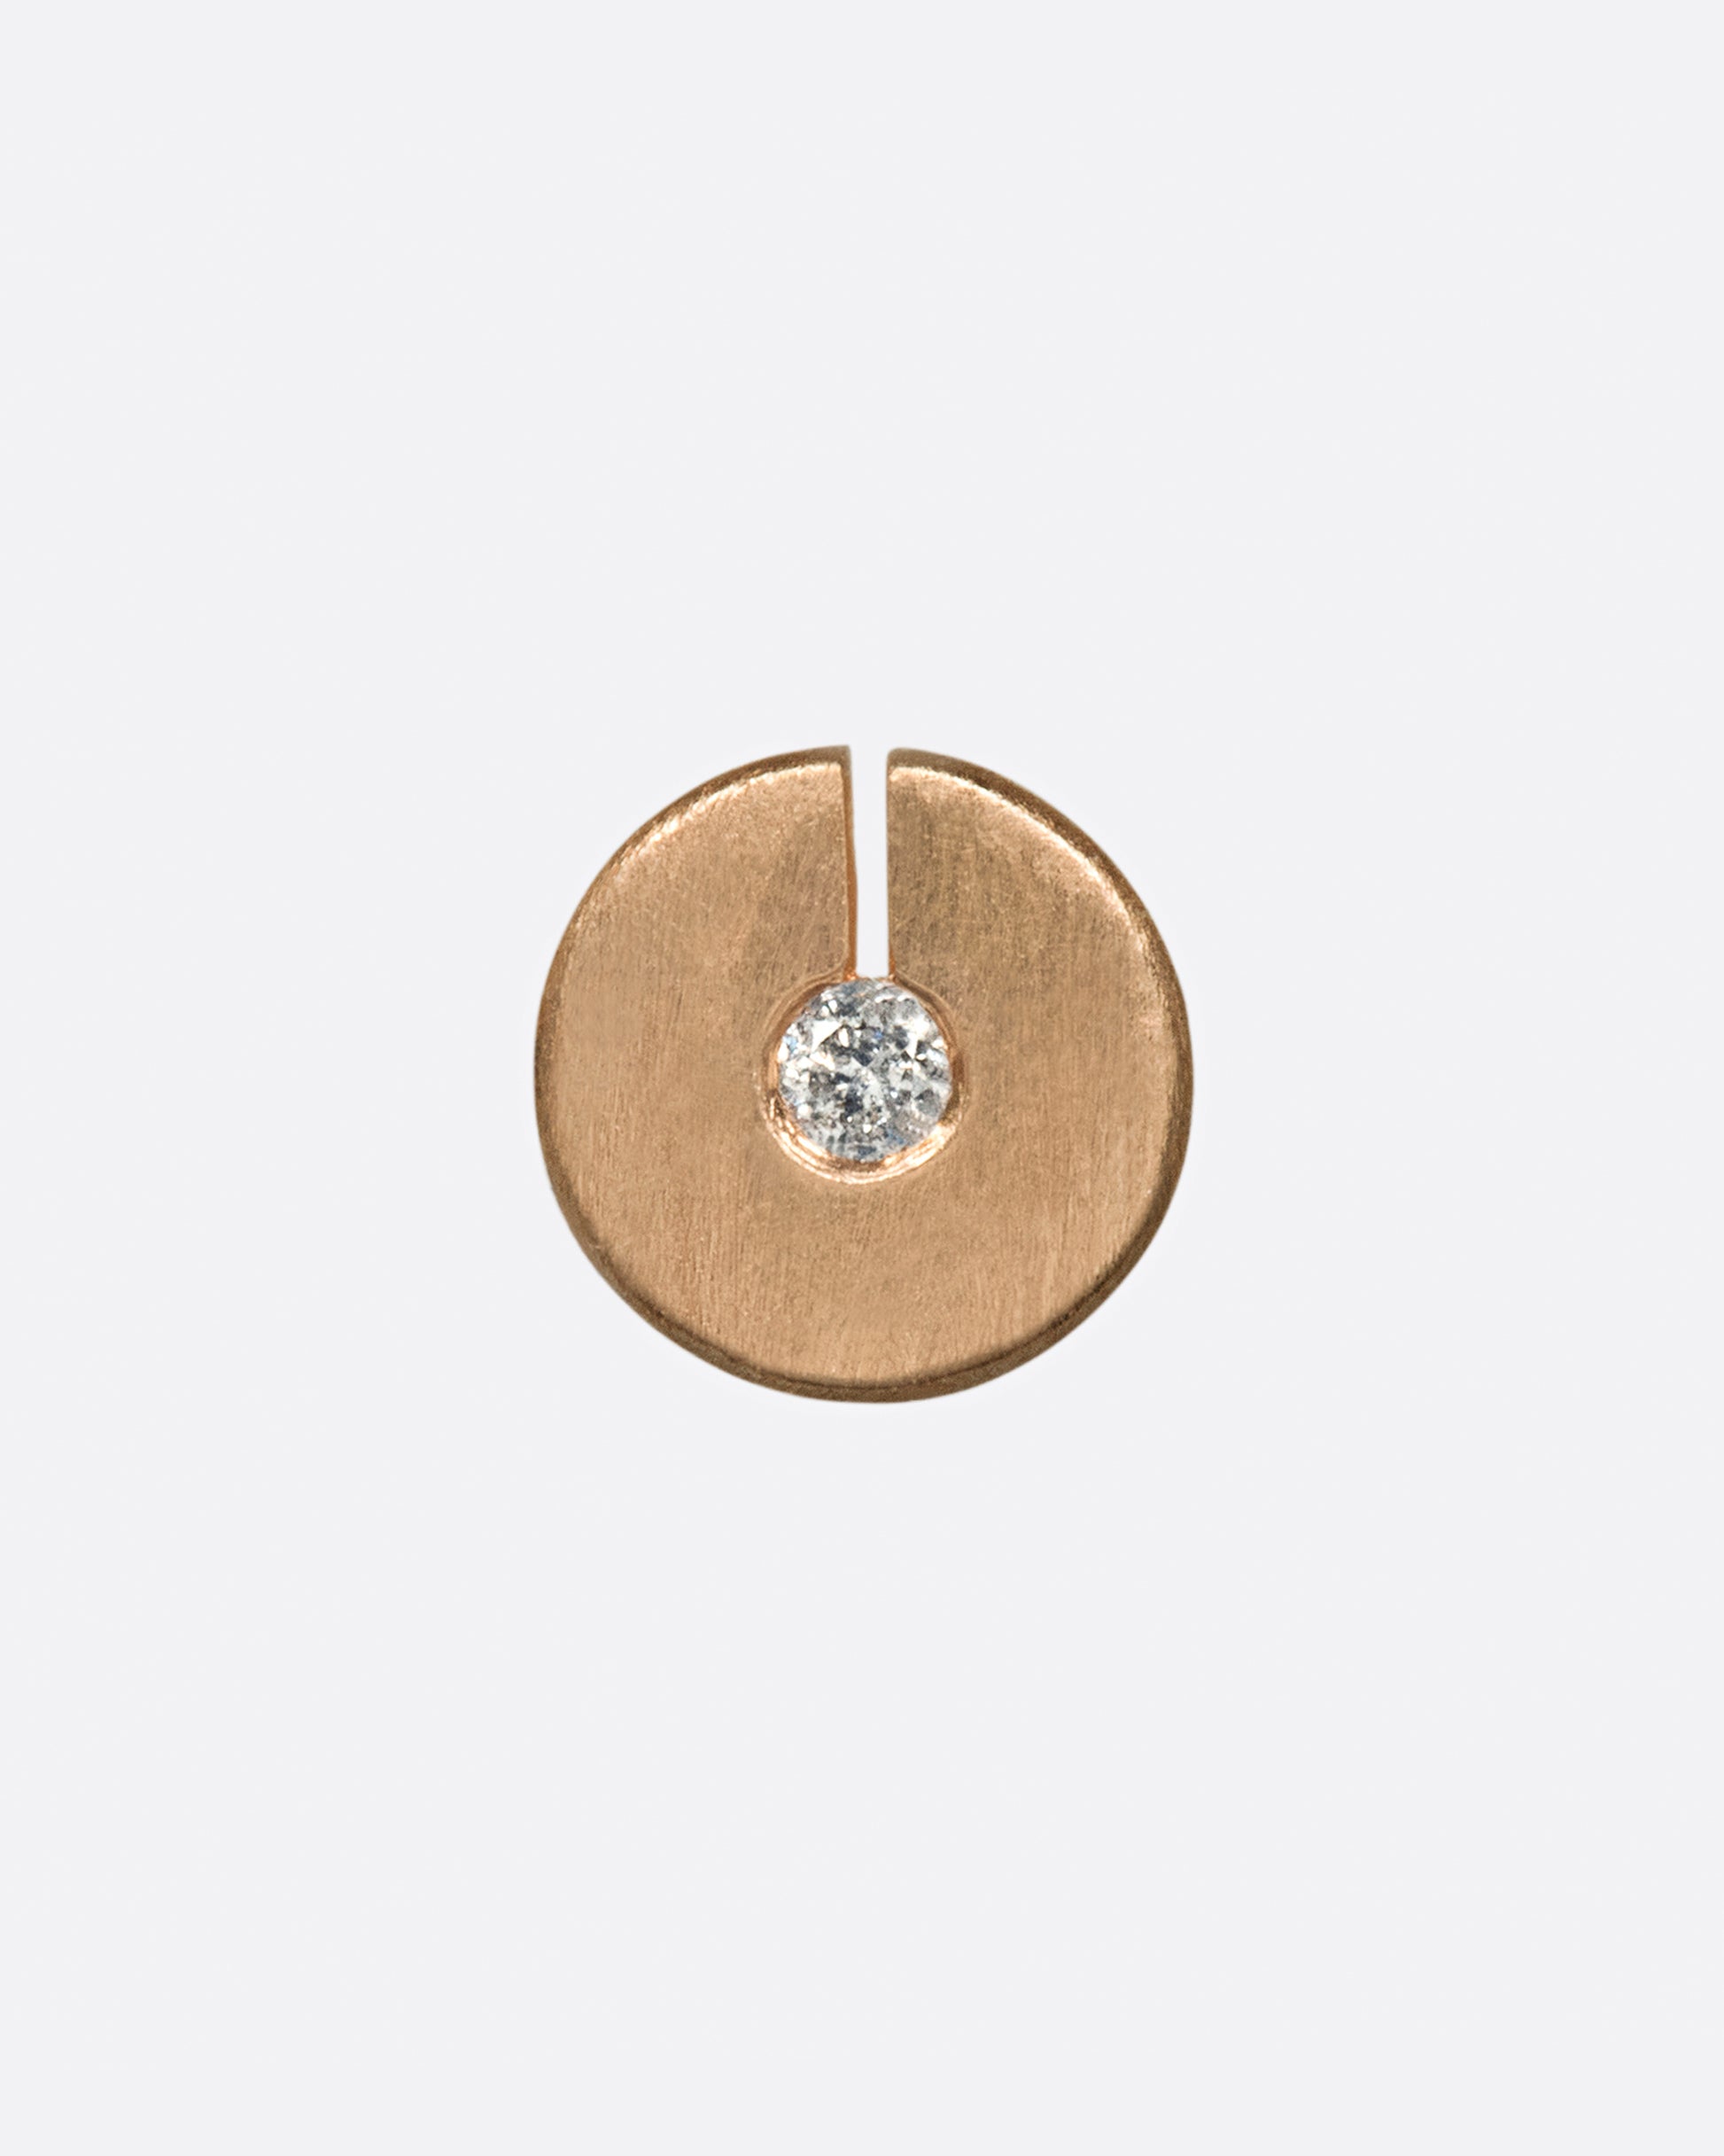 This disc stud has a diamond at its center, made even more dazzling by the break in the circle that allows light in.